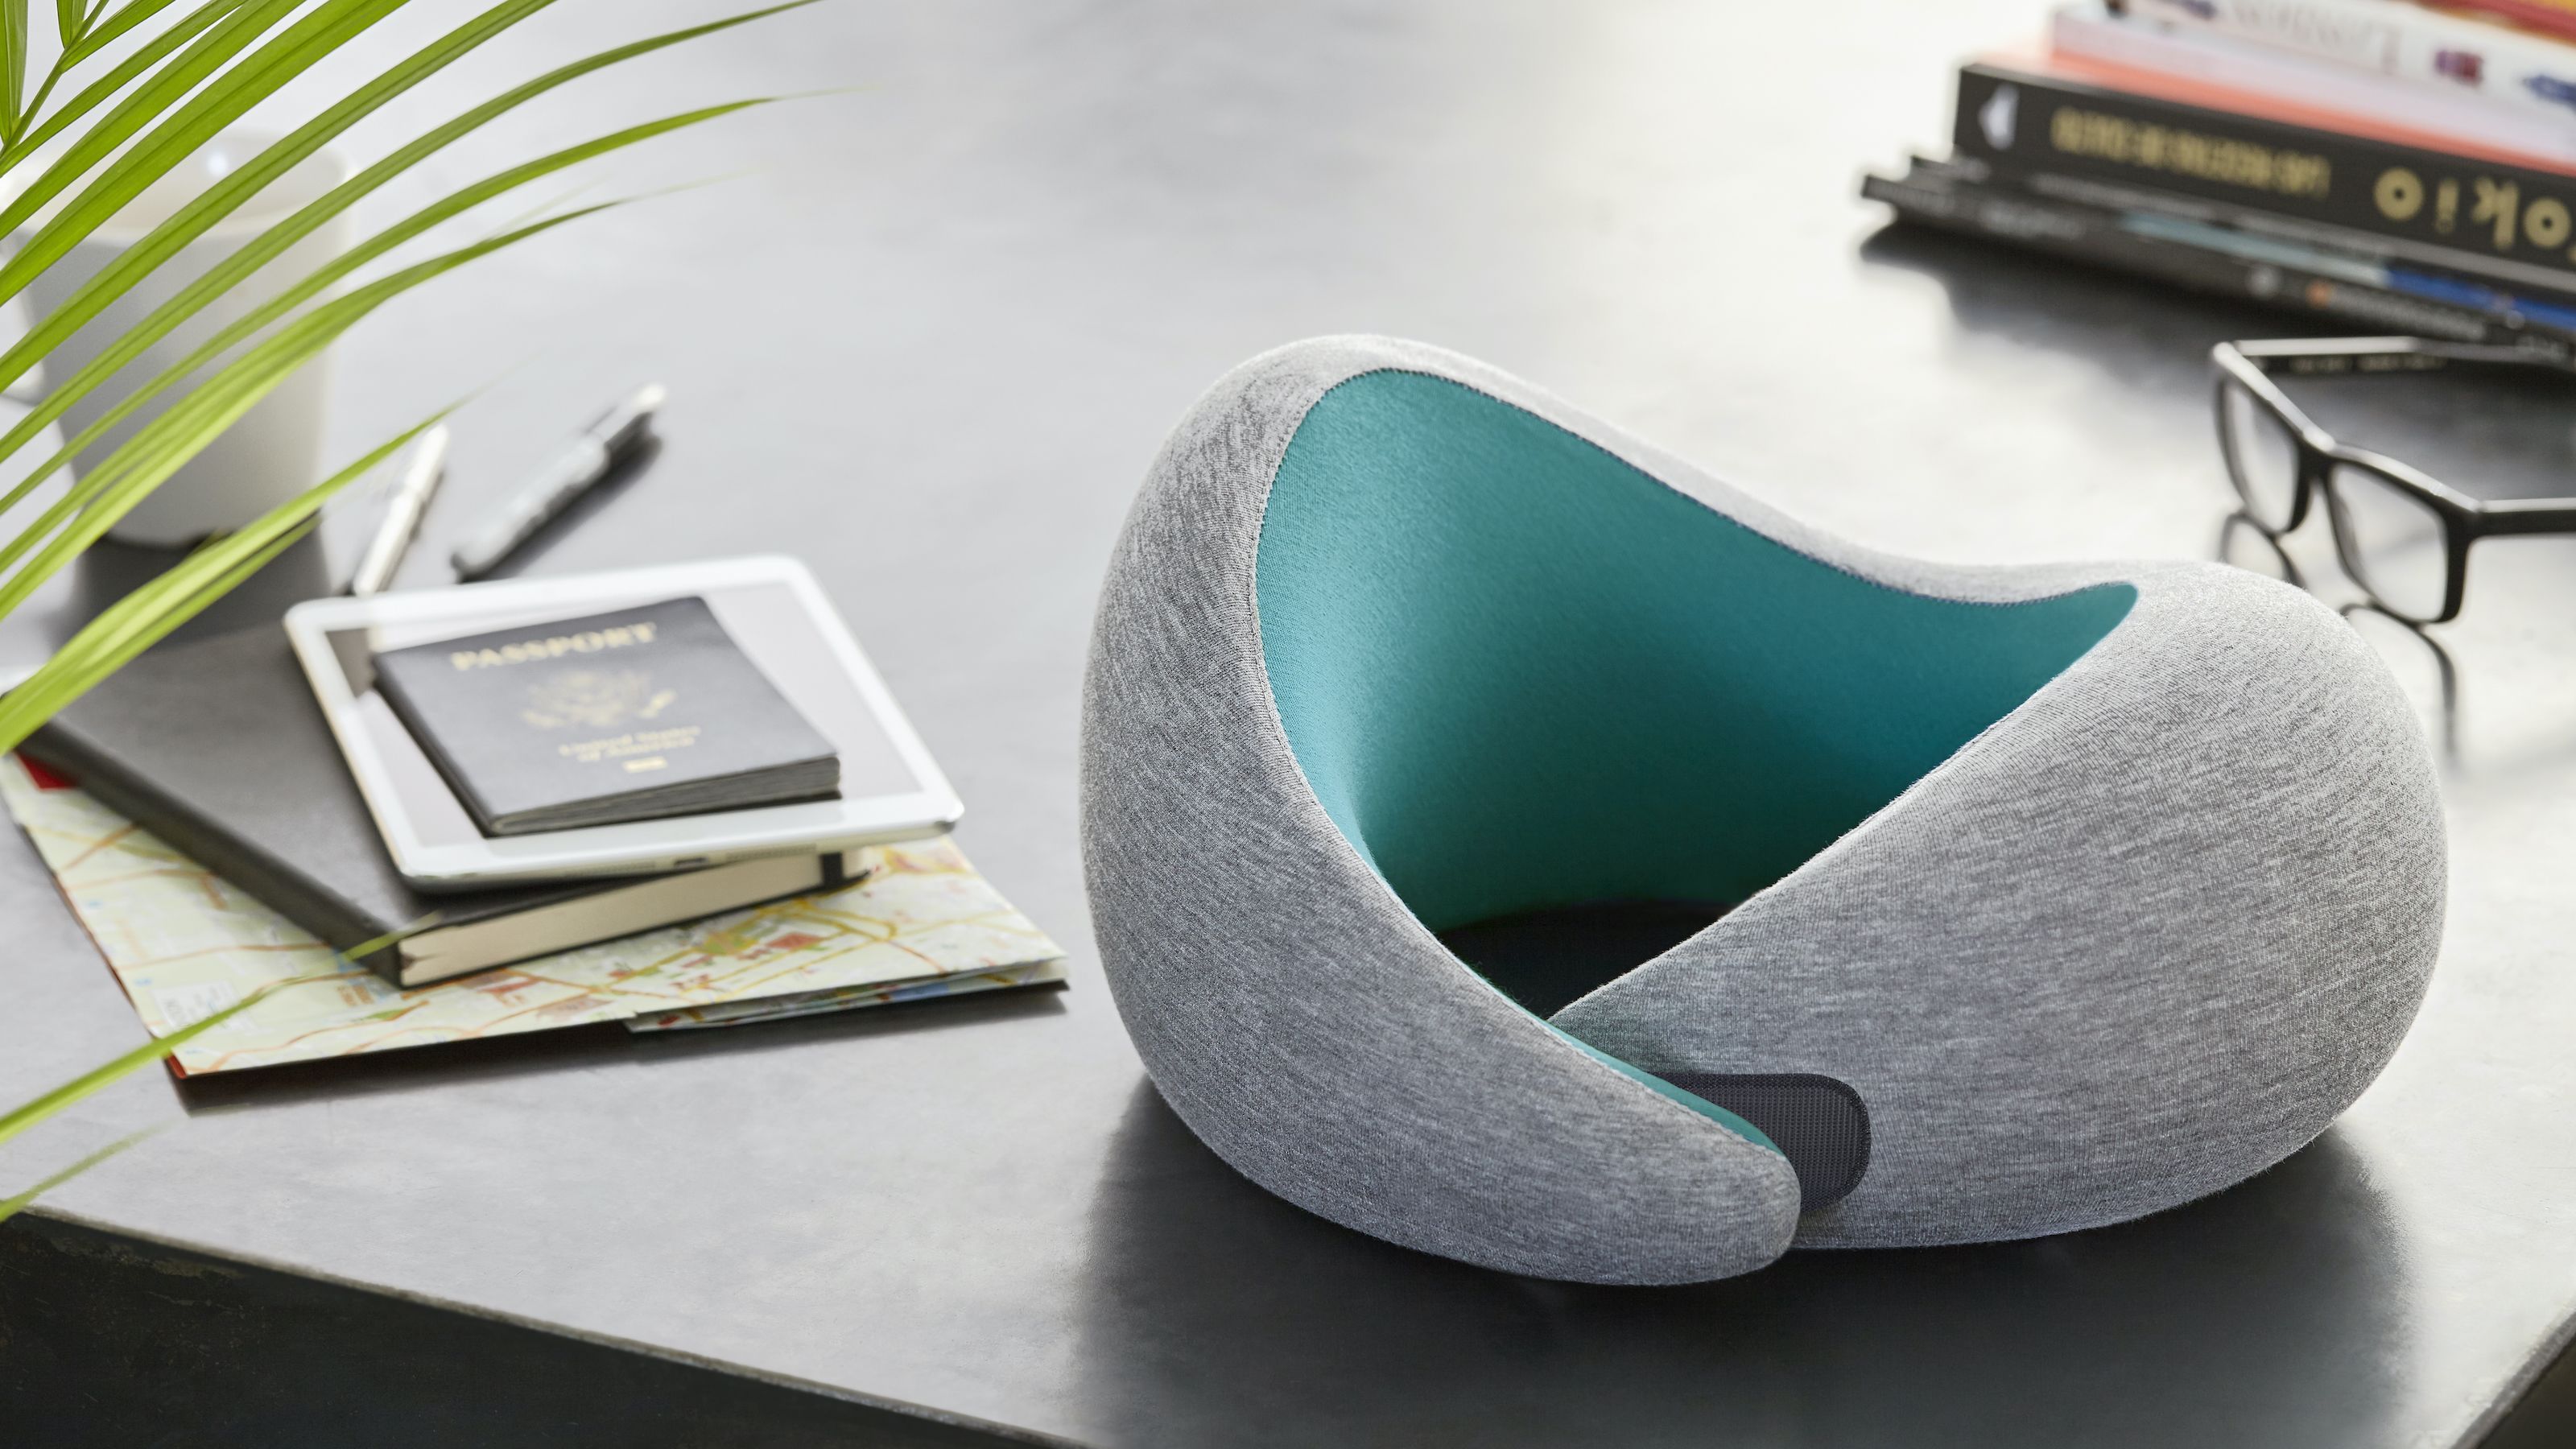 The Ostrichpillow Go Neck Pillow: Why it’s the perfect travel companion